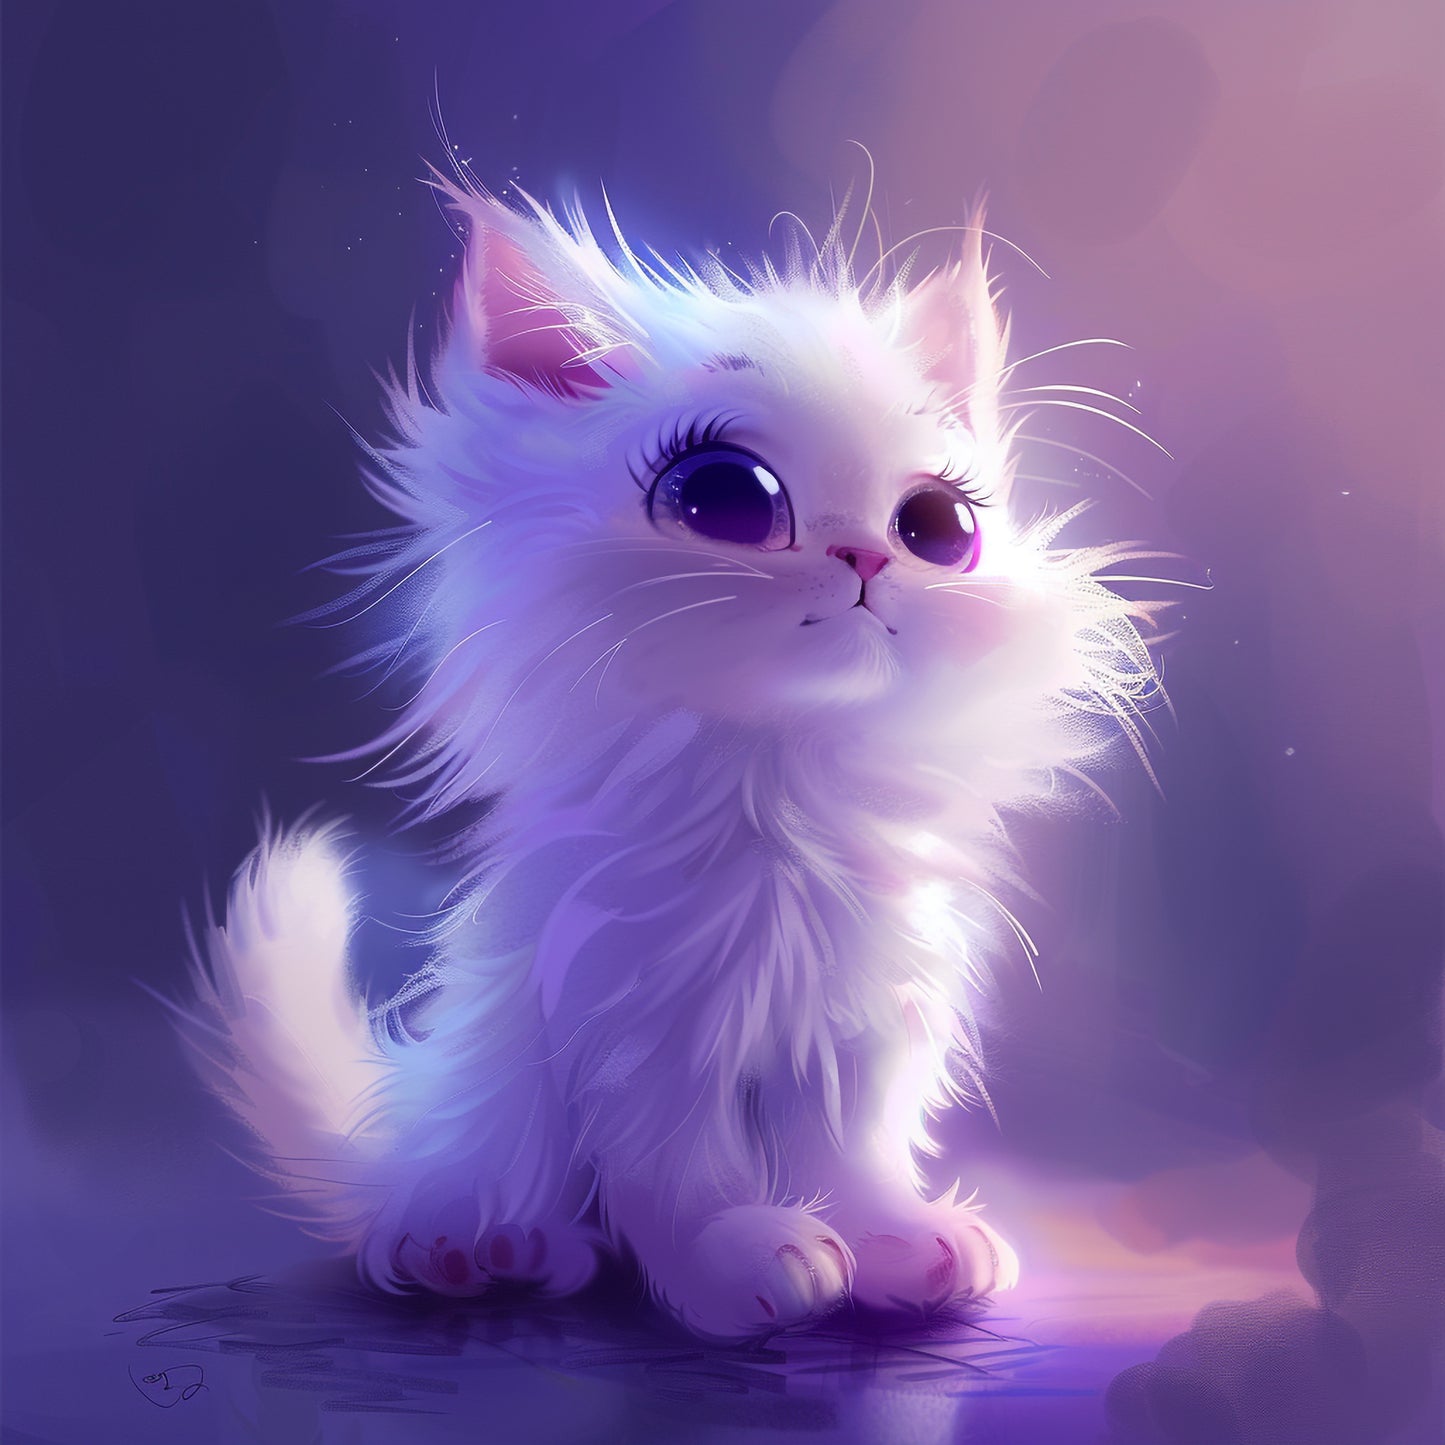 Adorable Fluffy White Kitten Illustration in Dreamy Ambiance